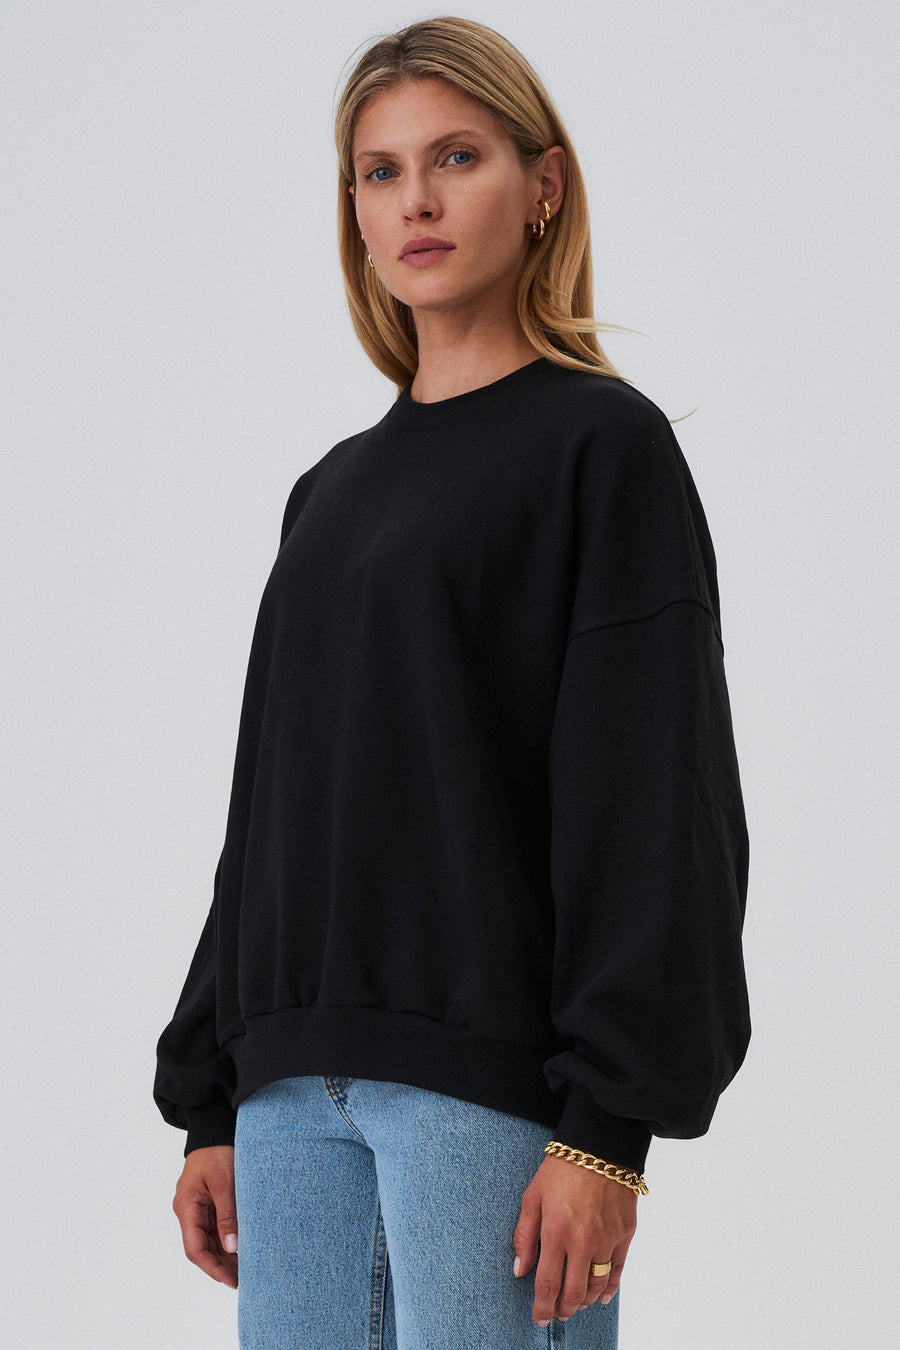 Sweatshirt in organic cotton / 17 / 12 / onyx black *cropped-jeans-from-recycled-cotton-05-12-light-indigo* ?The model is 177cm tall and wears size XS/S? |